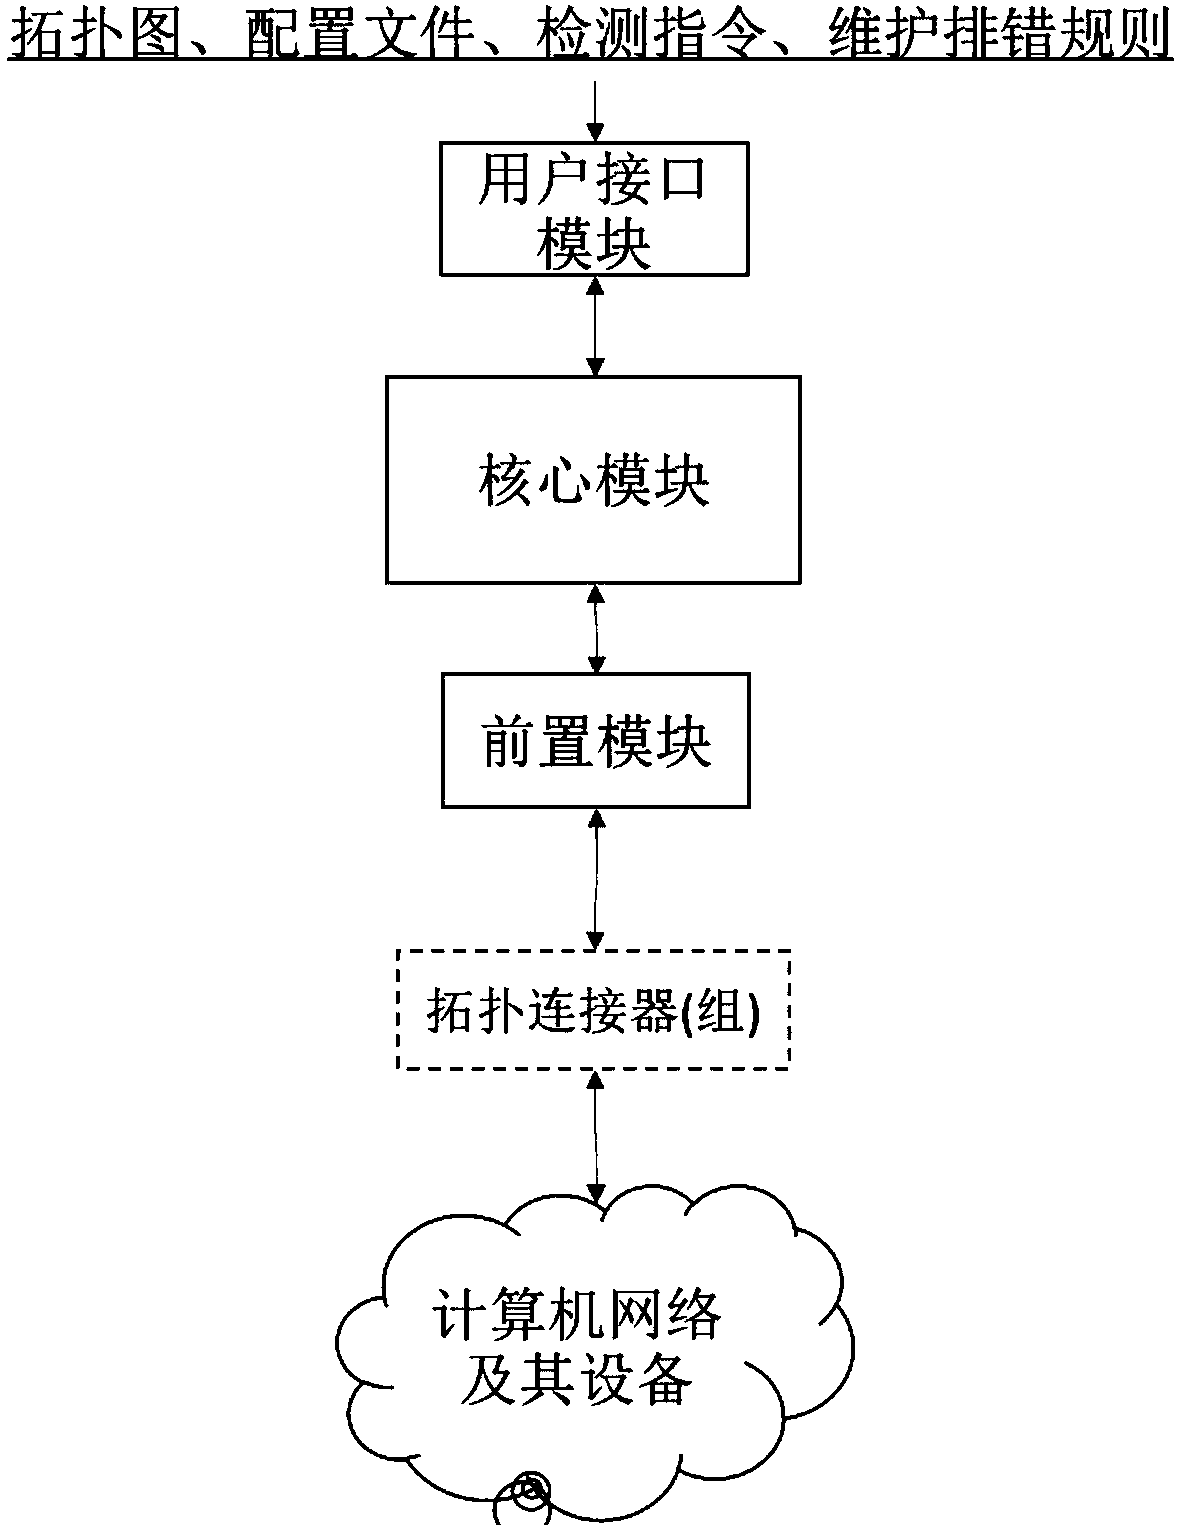 Computer network intelligent networking and optimization system and method